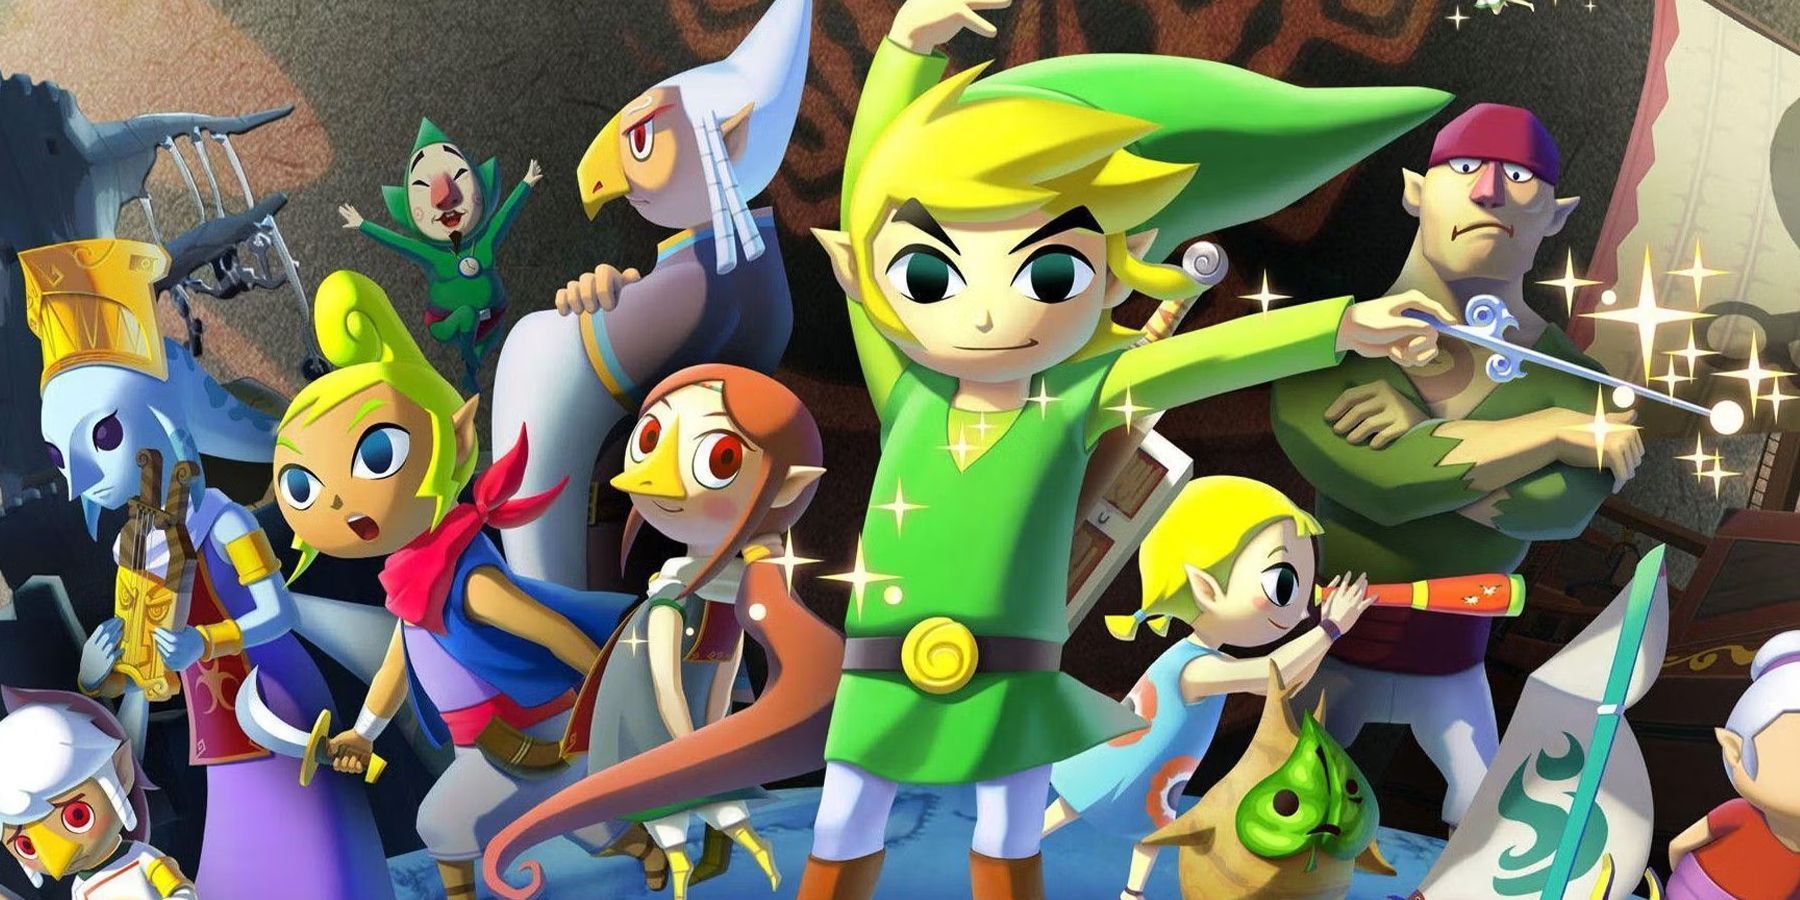 The cover art for Nintendo's The Legend of Zelda: The Wind Waker HD